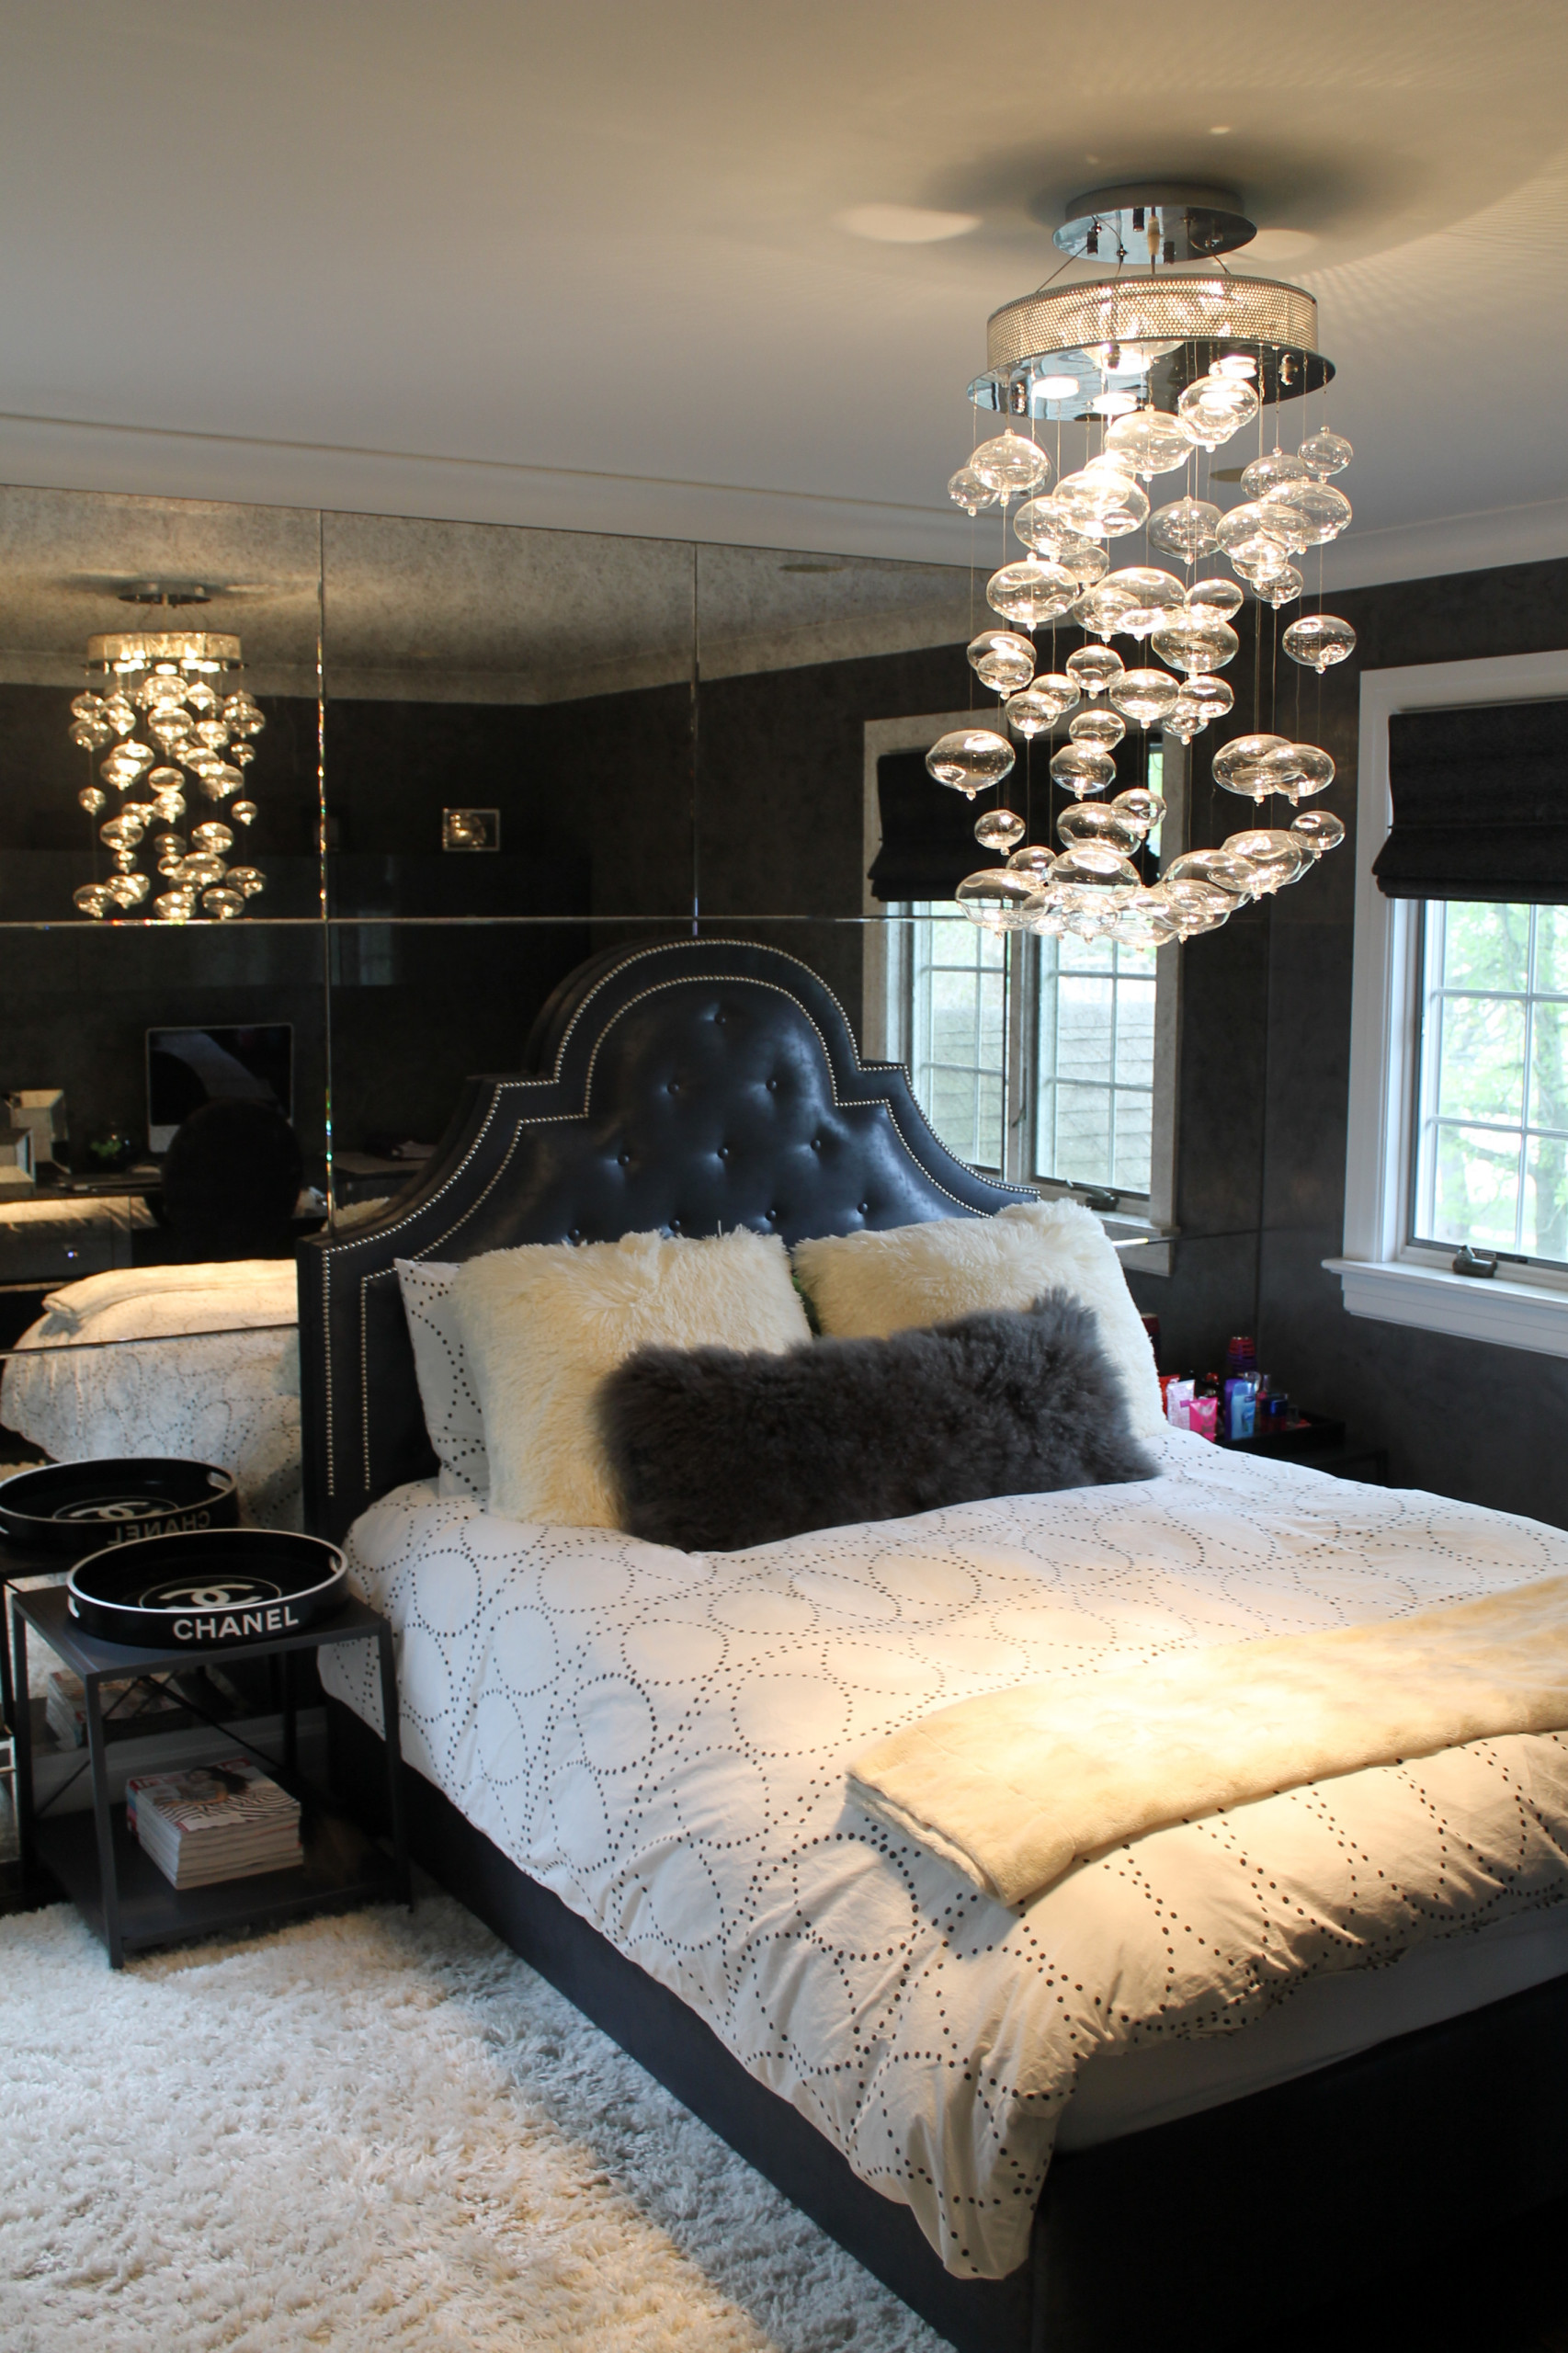 Chic Modern Bedroom Woodmere, NY Home